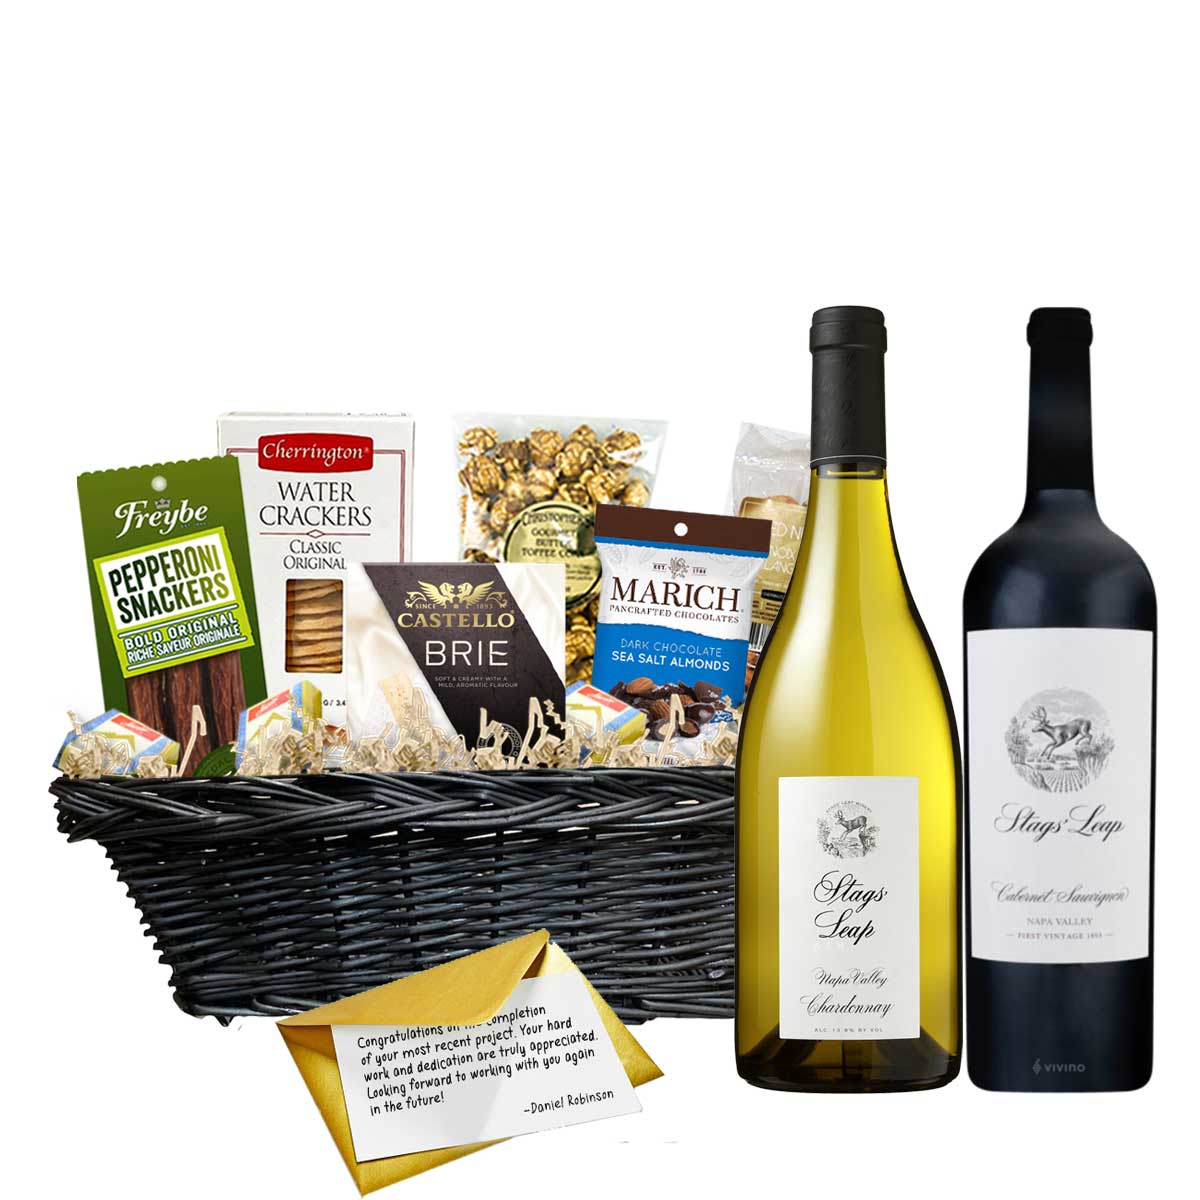 TAG Liquor Stores Canada Delivery-Stags Leap Chardonnay and Cabernet Sauvignon 2 x 750ml Corporate Gift Basket-wine-tagliquorstores.com